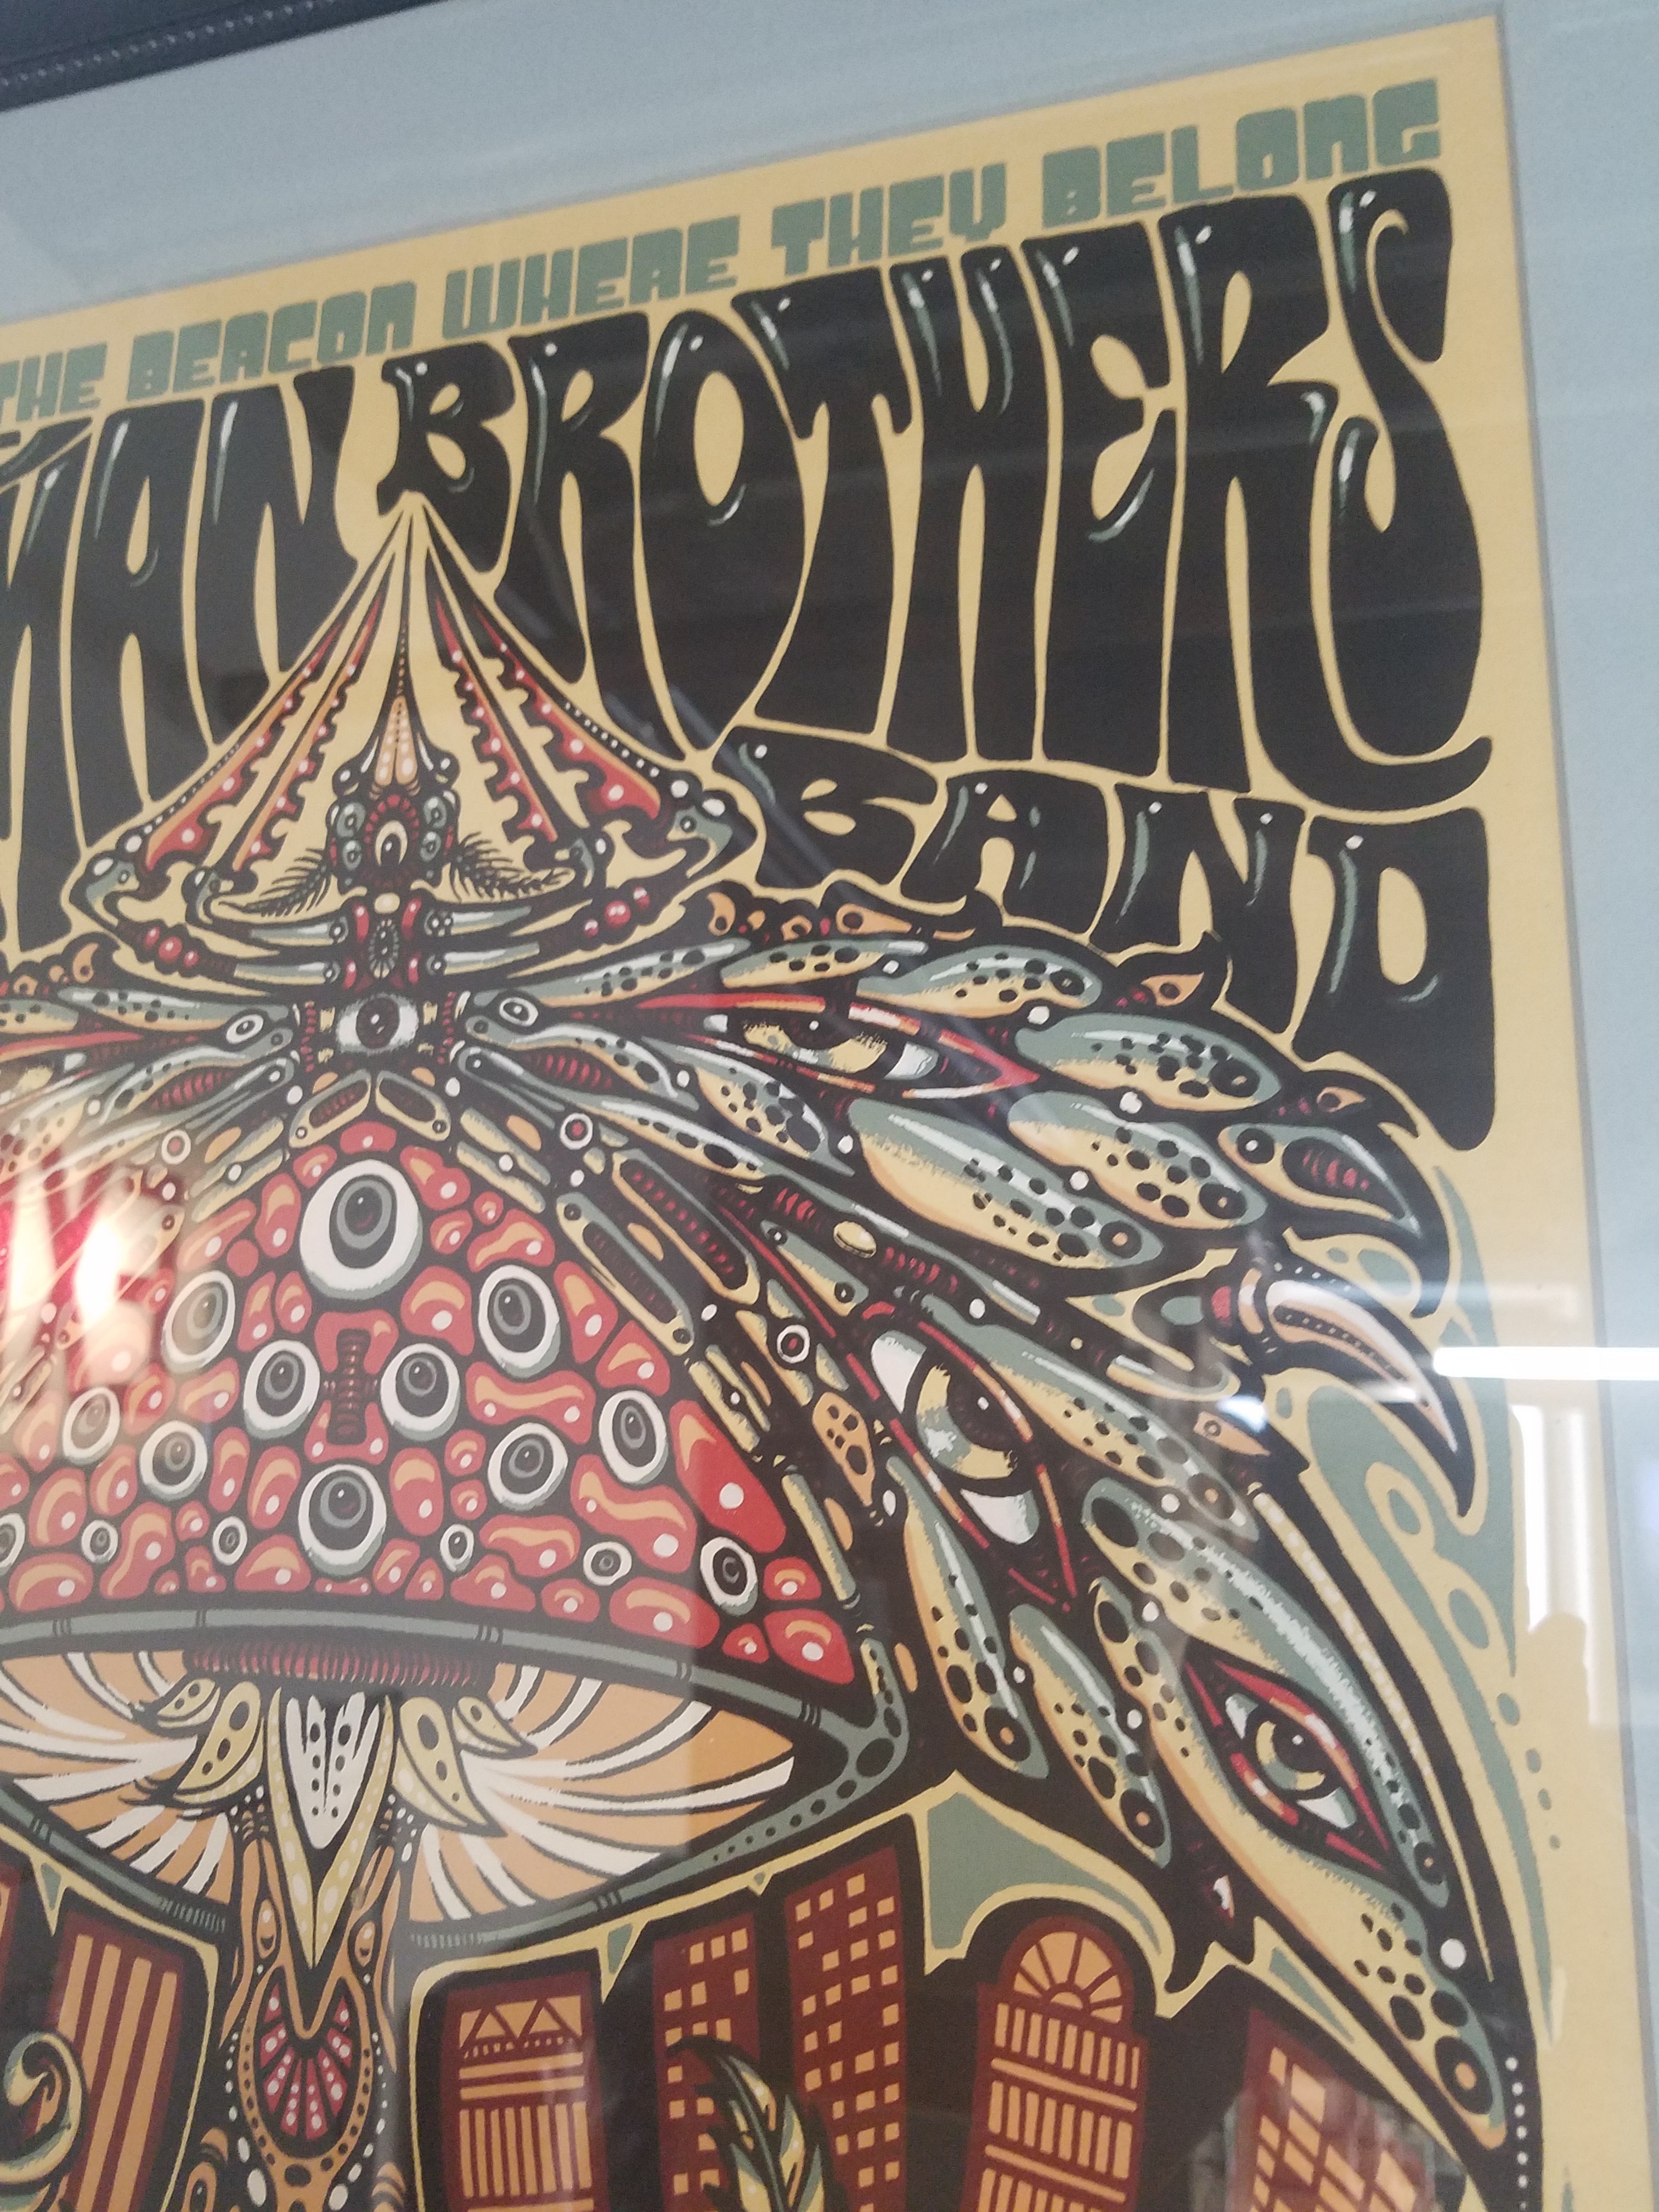 2011 THE ALLMAN BROTHERS BAND BEACON THEATRE NYC POSTER FRAMED